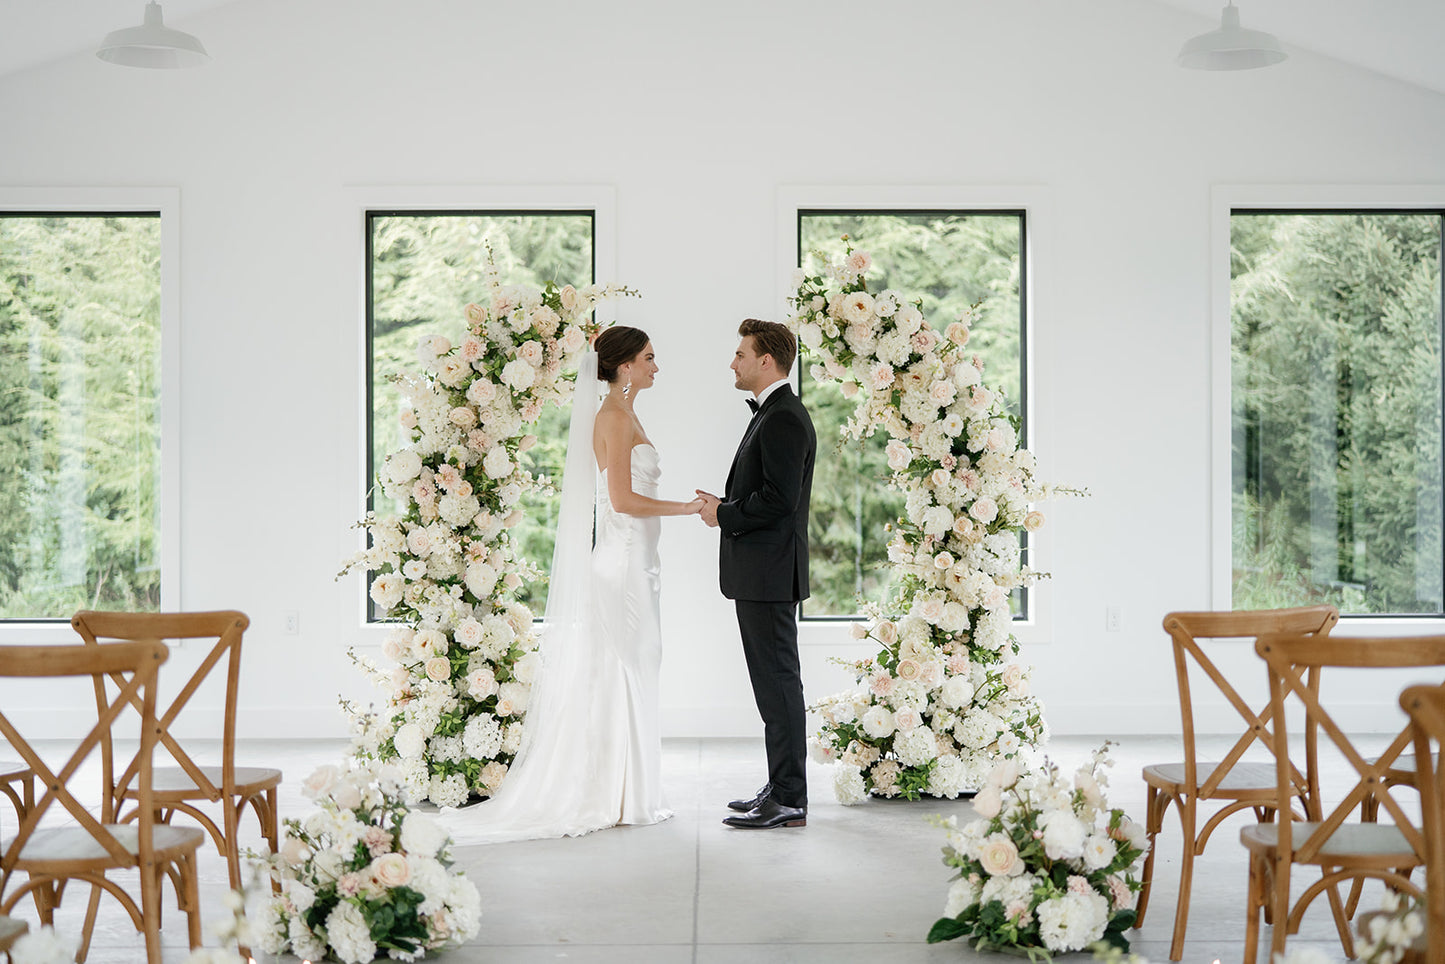 exchanging vows in front of rental flowers